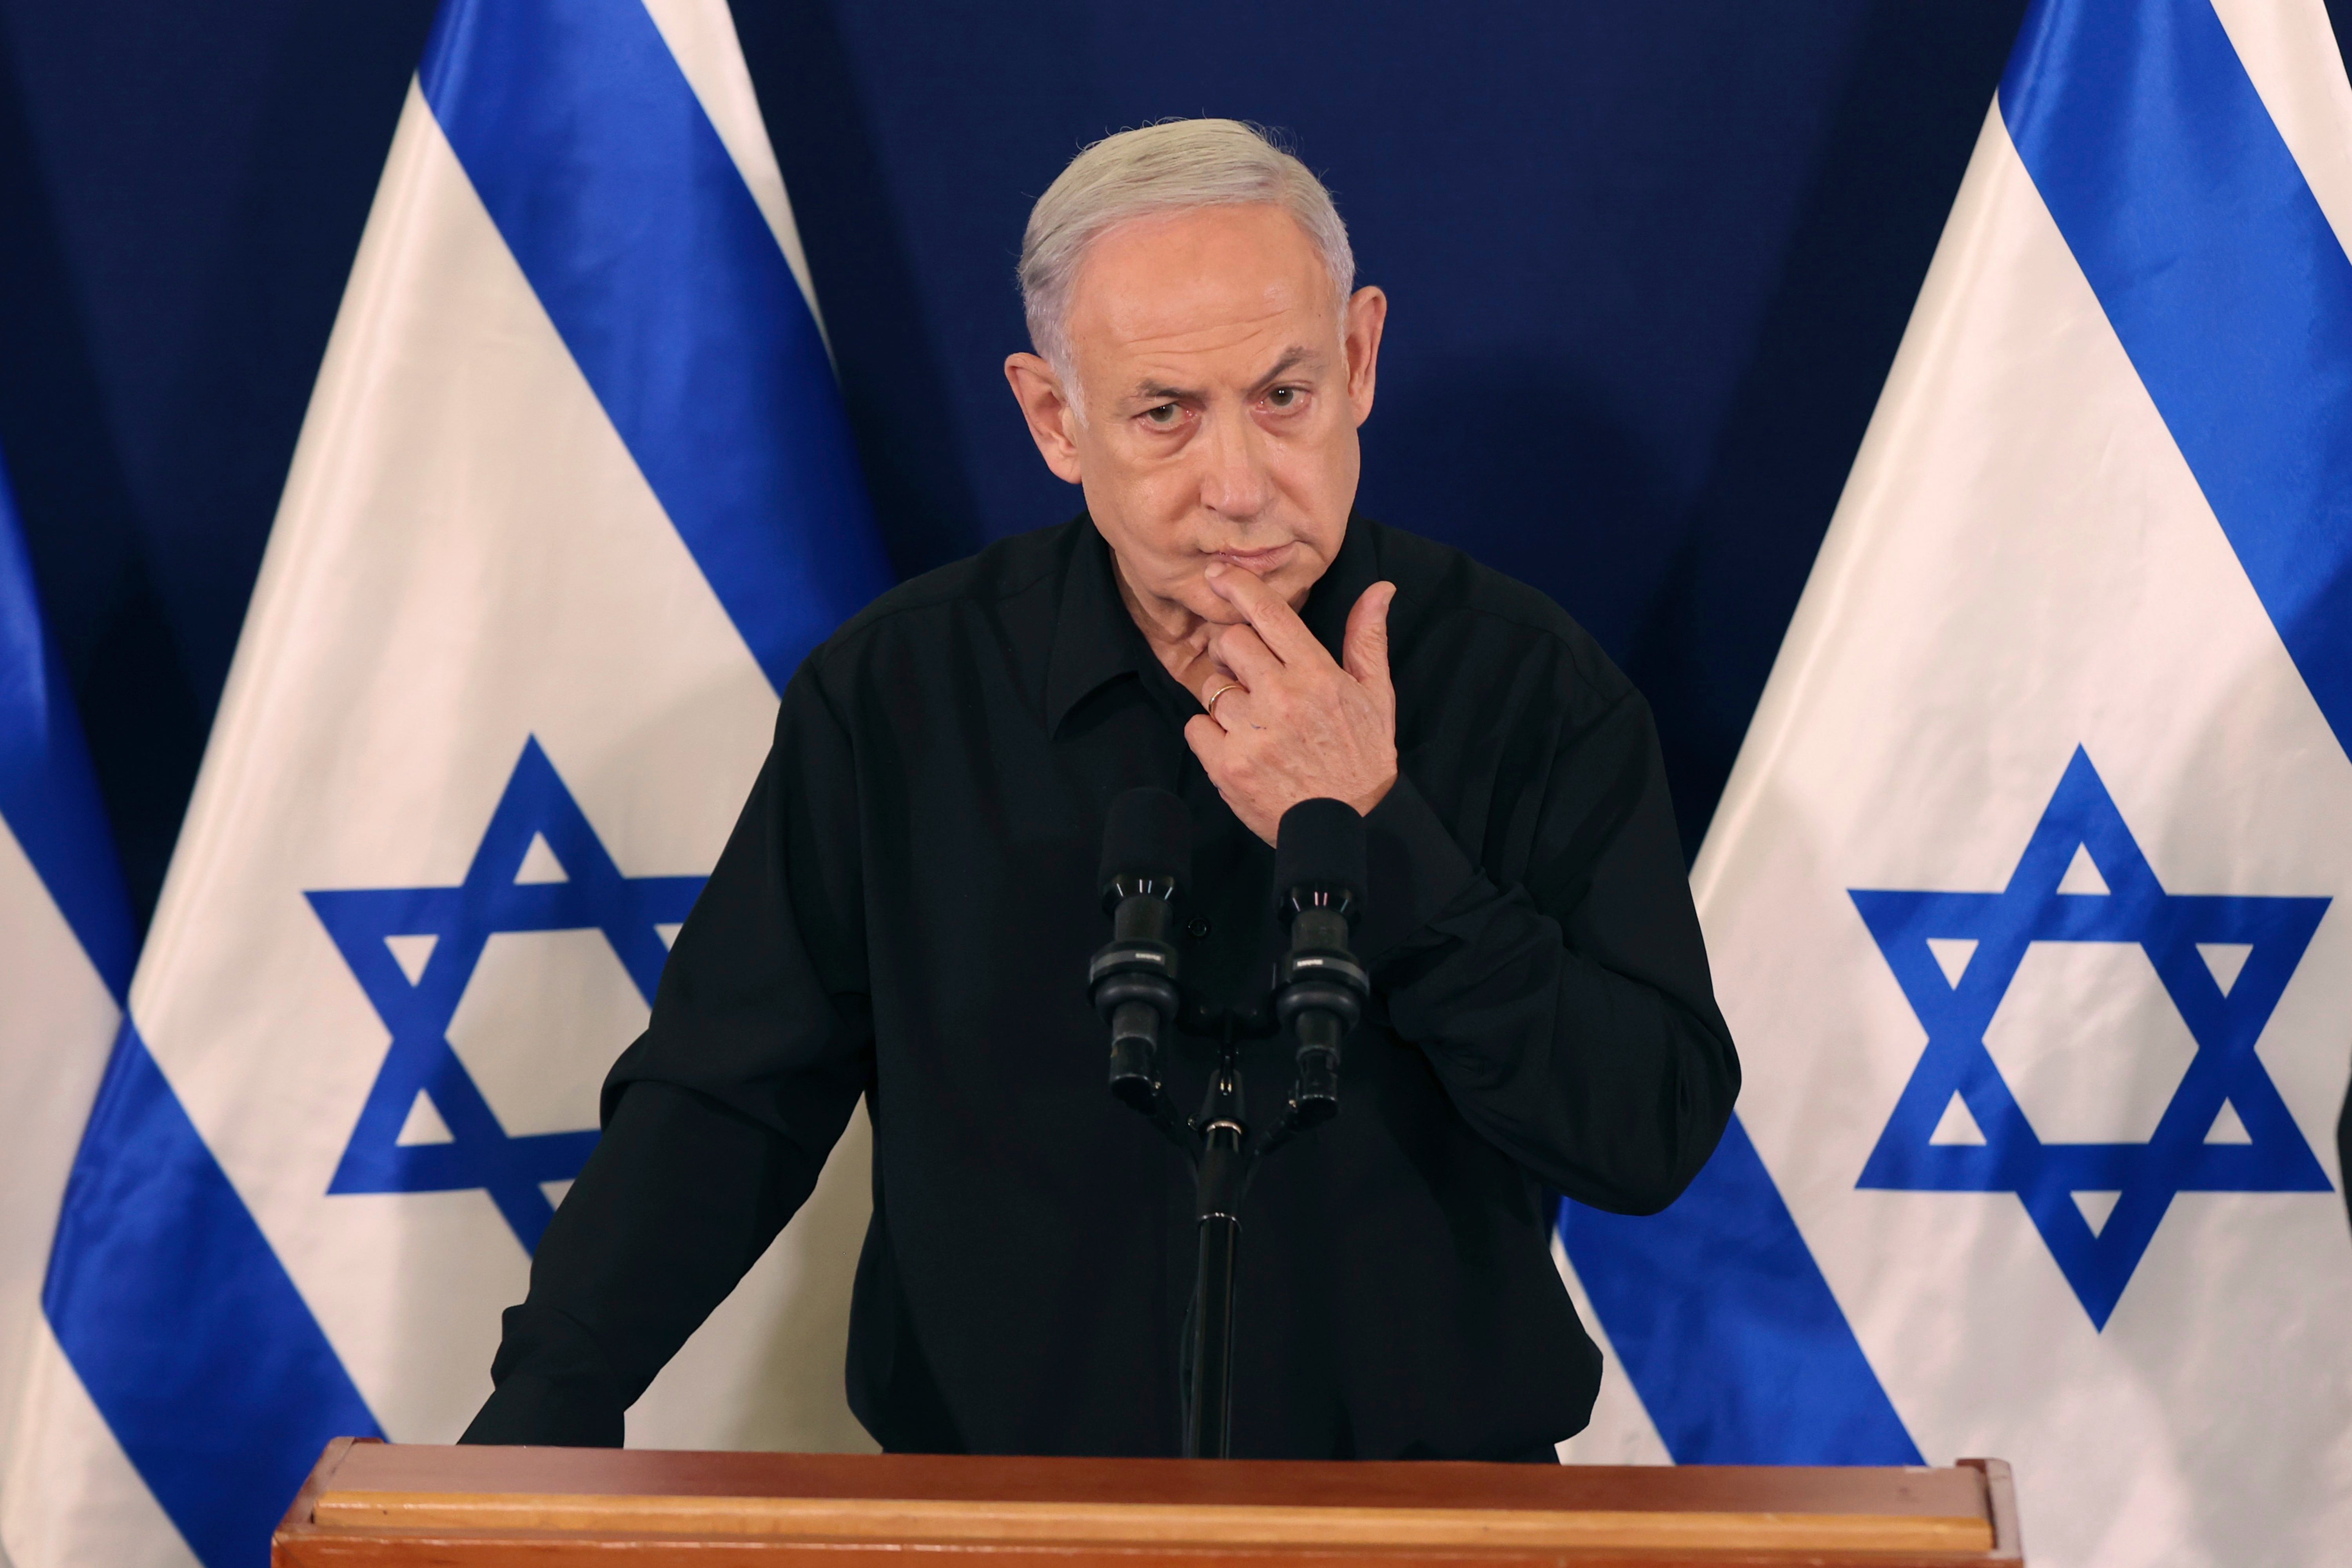 Benjamin Netanyahu responded angrily to suggestions that he should resign over Hamas’s attack